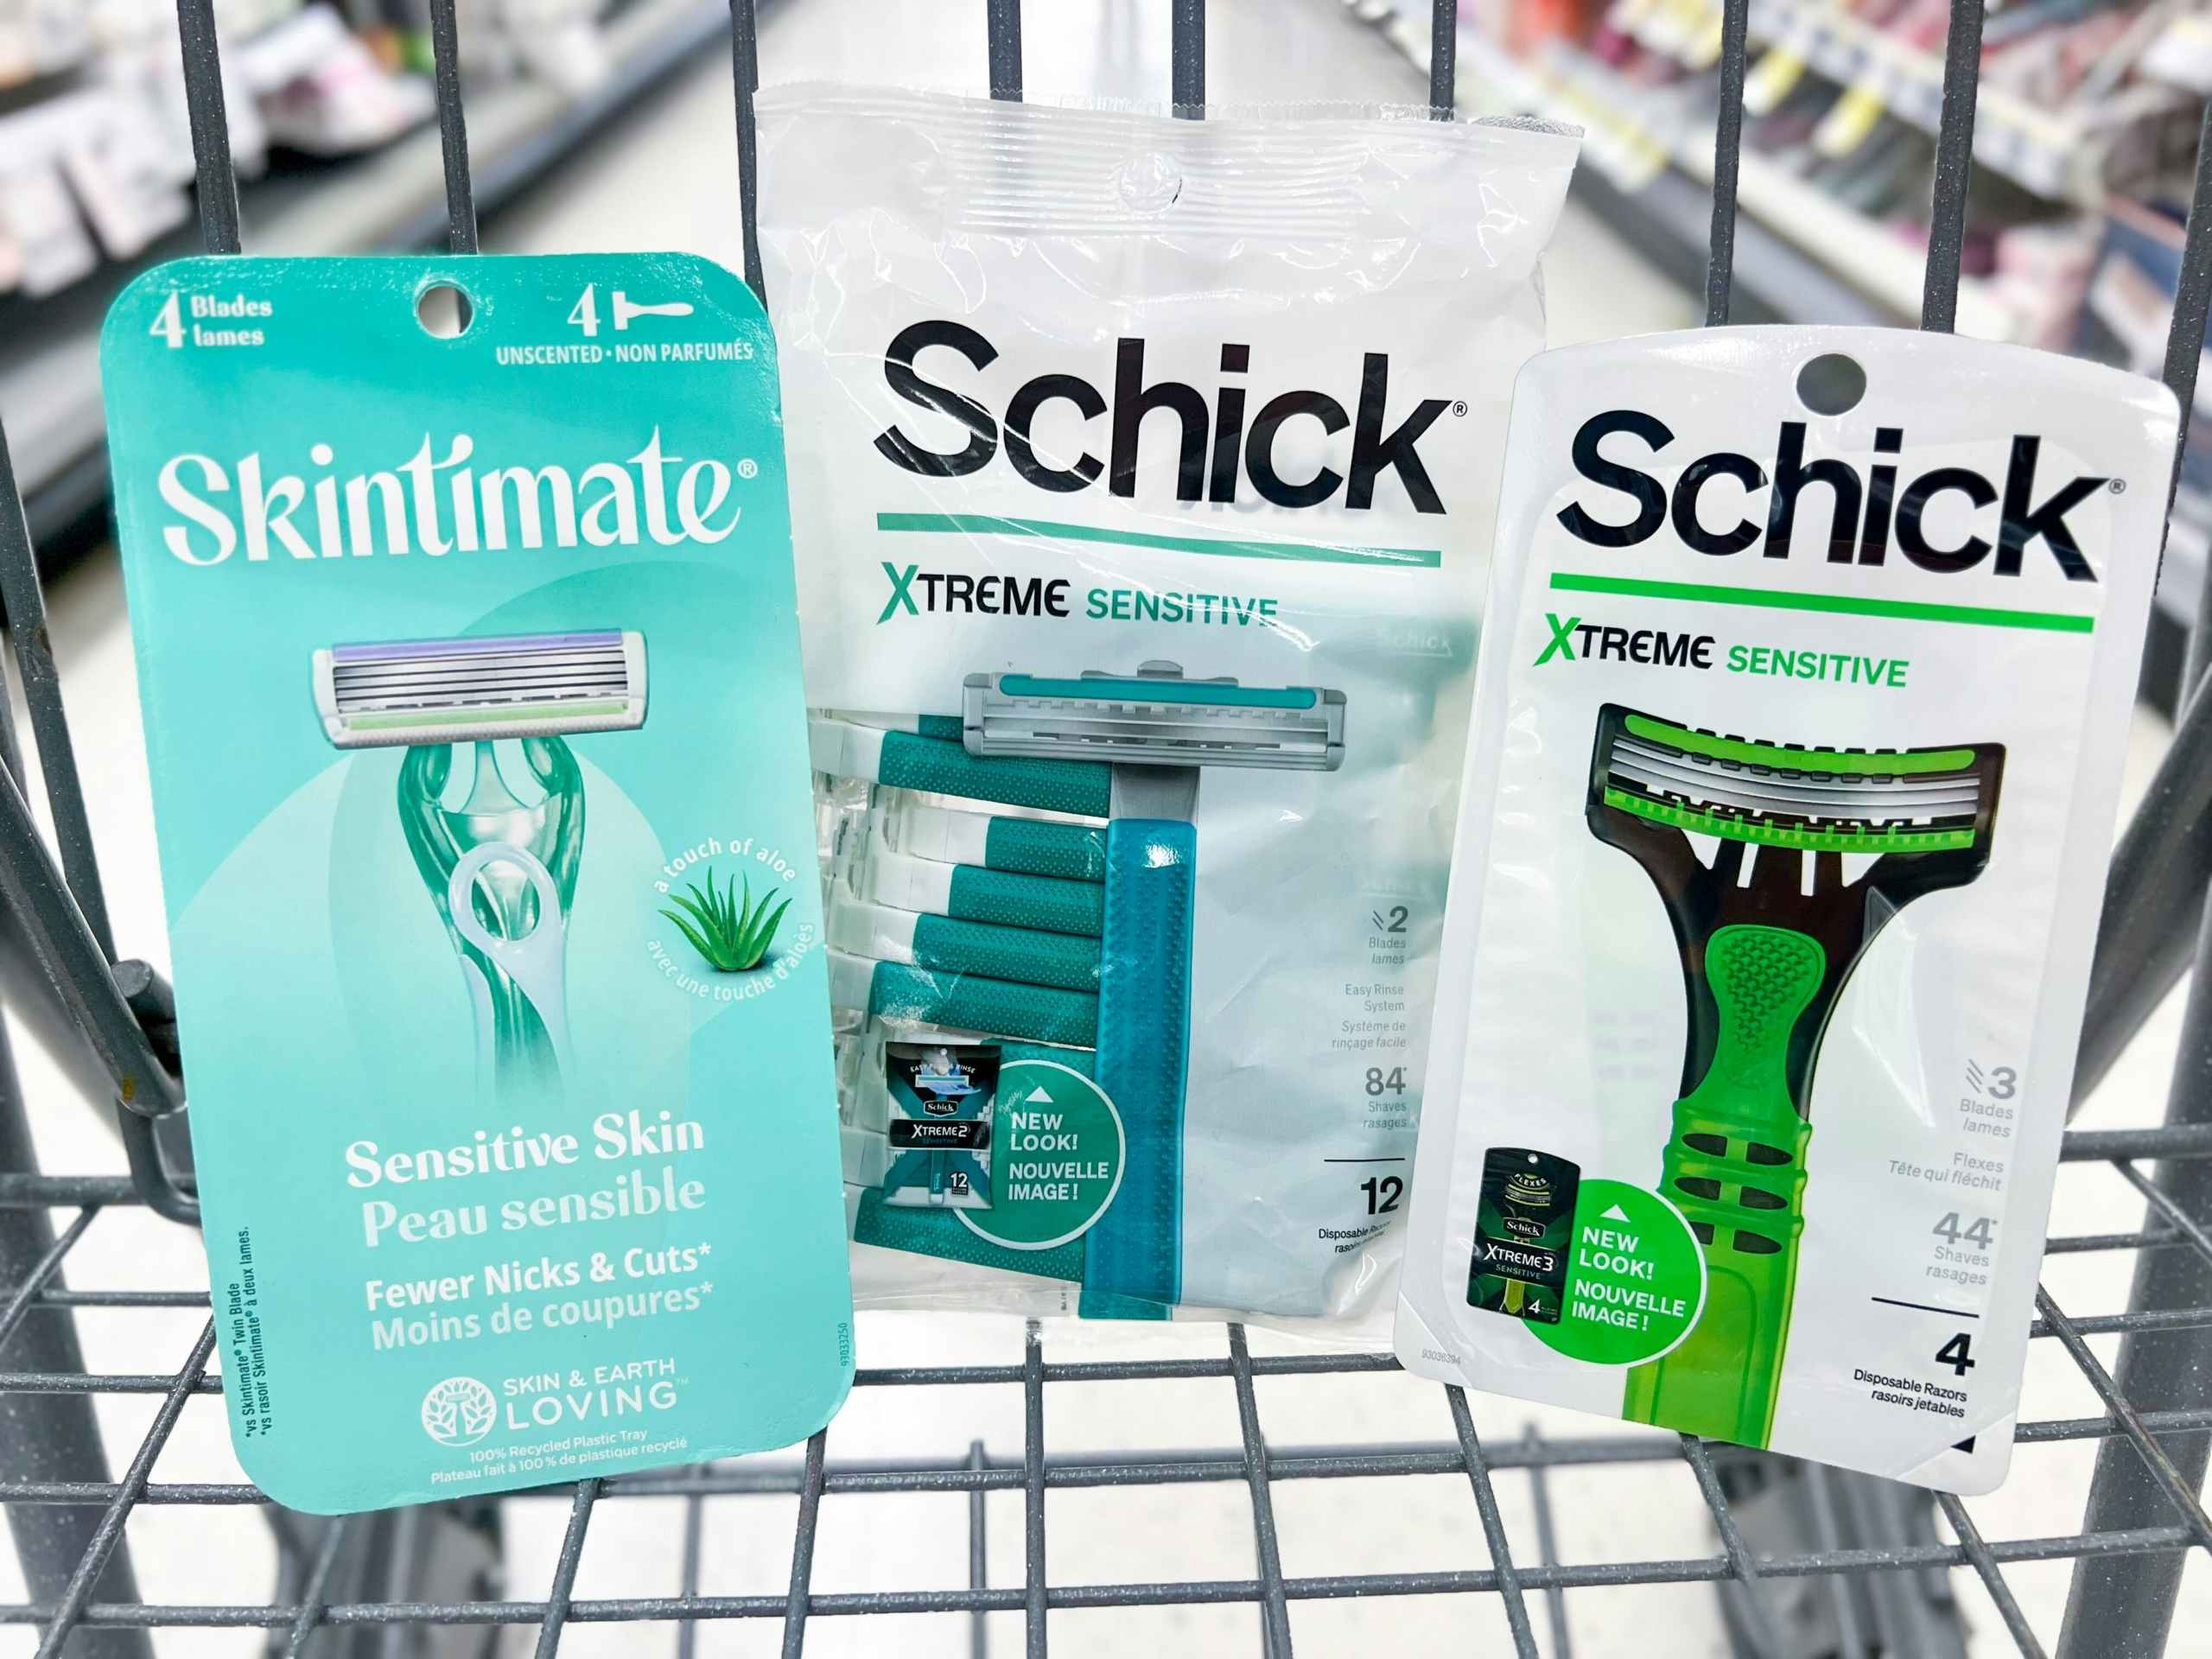 schick, skintimate, and schick disposable razors in shopping cart